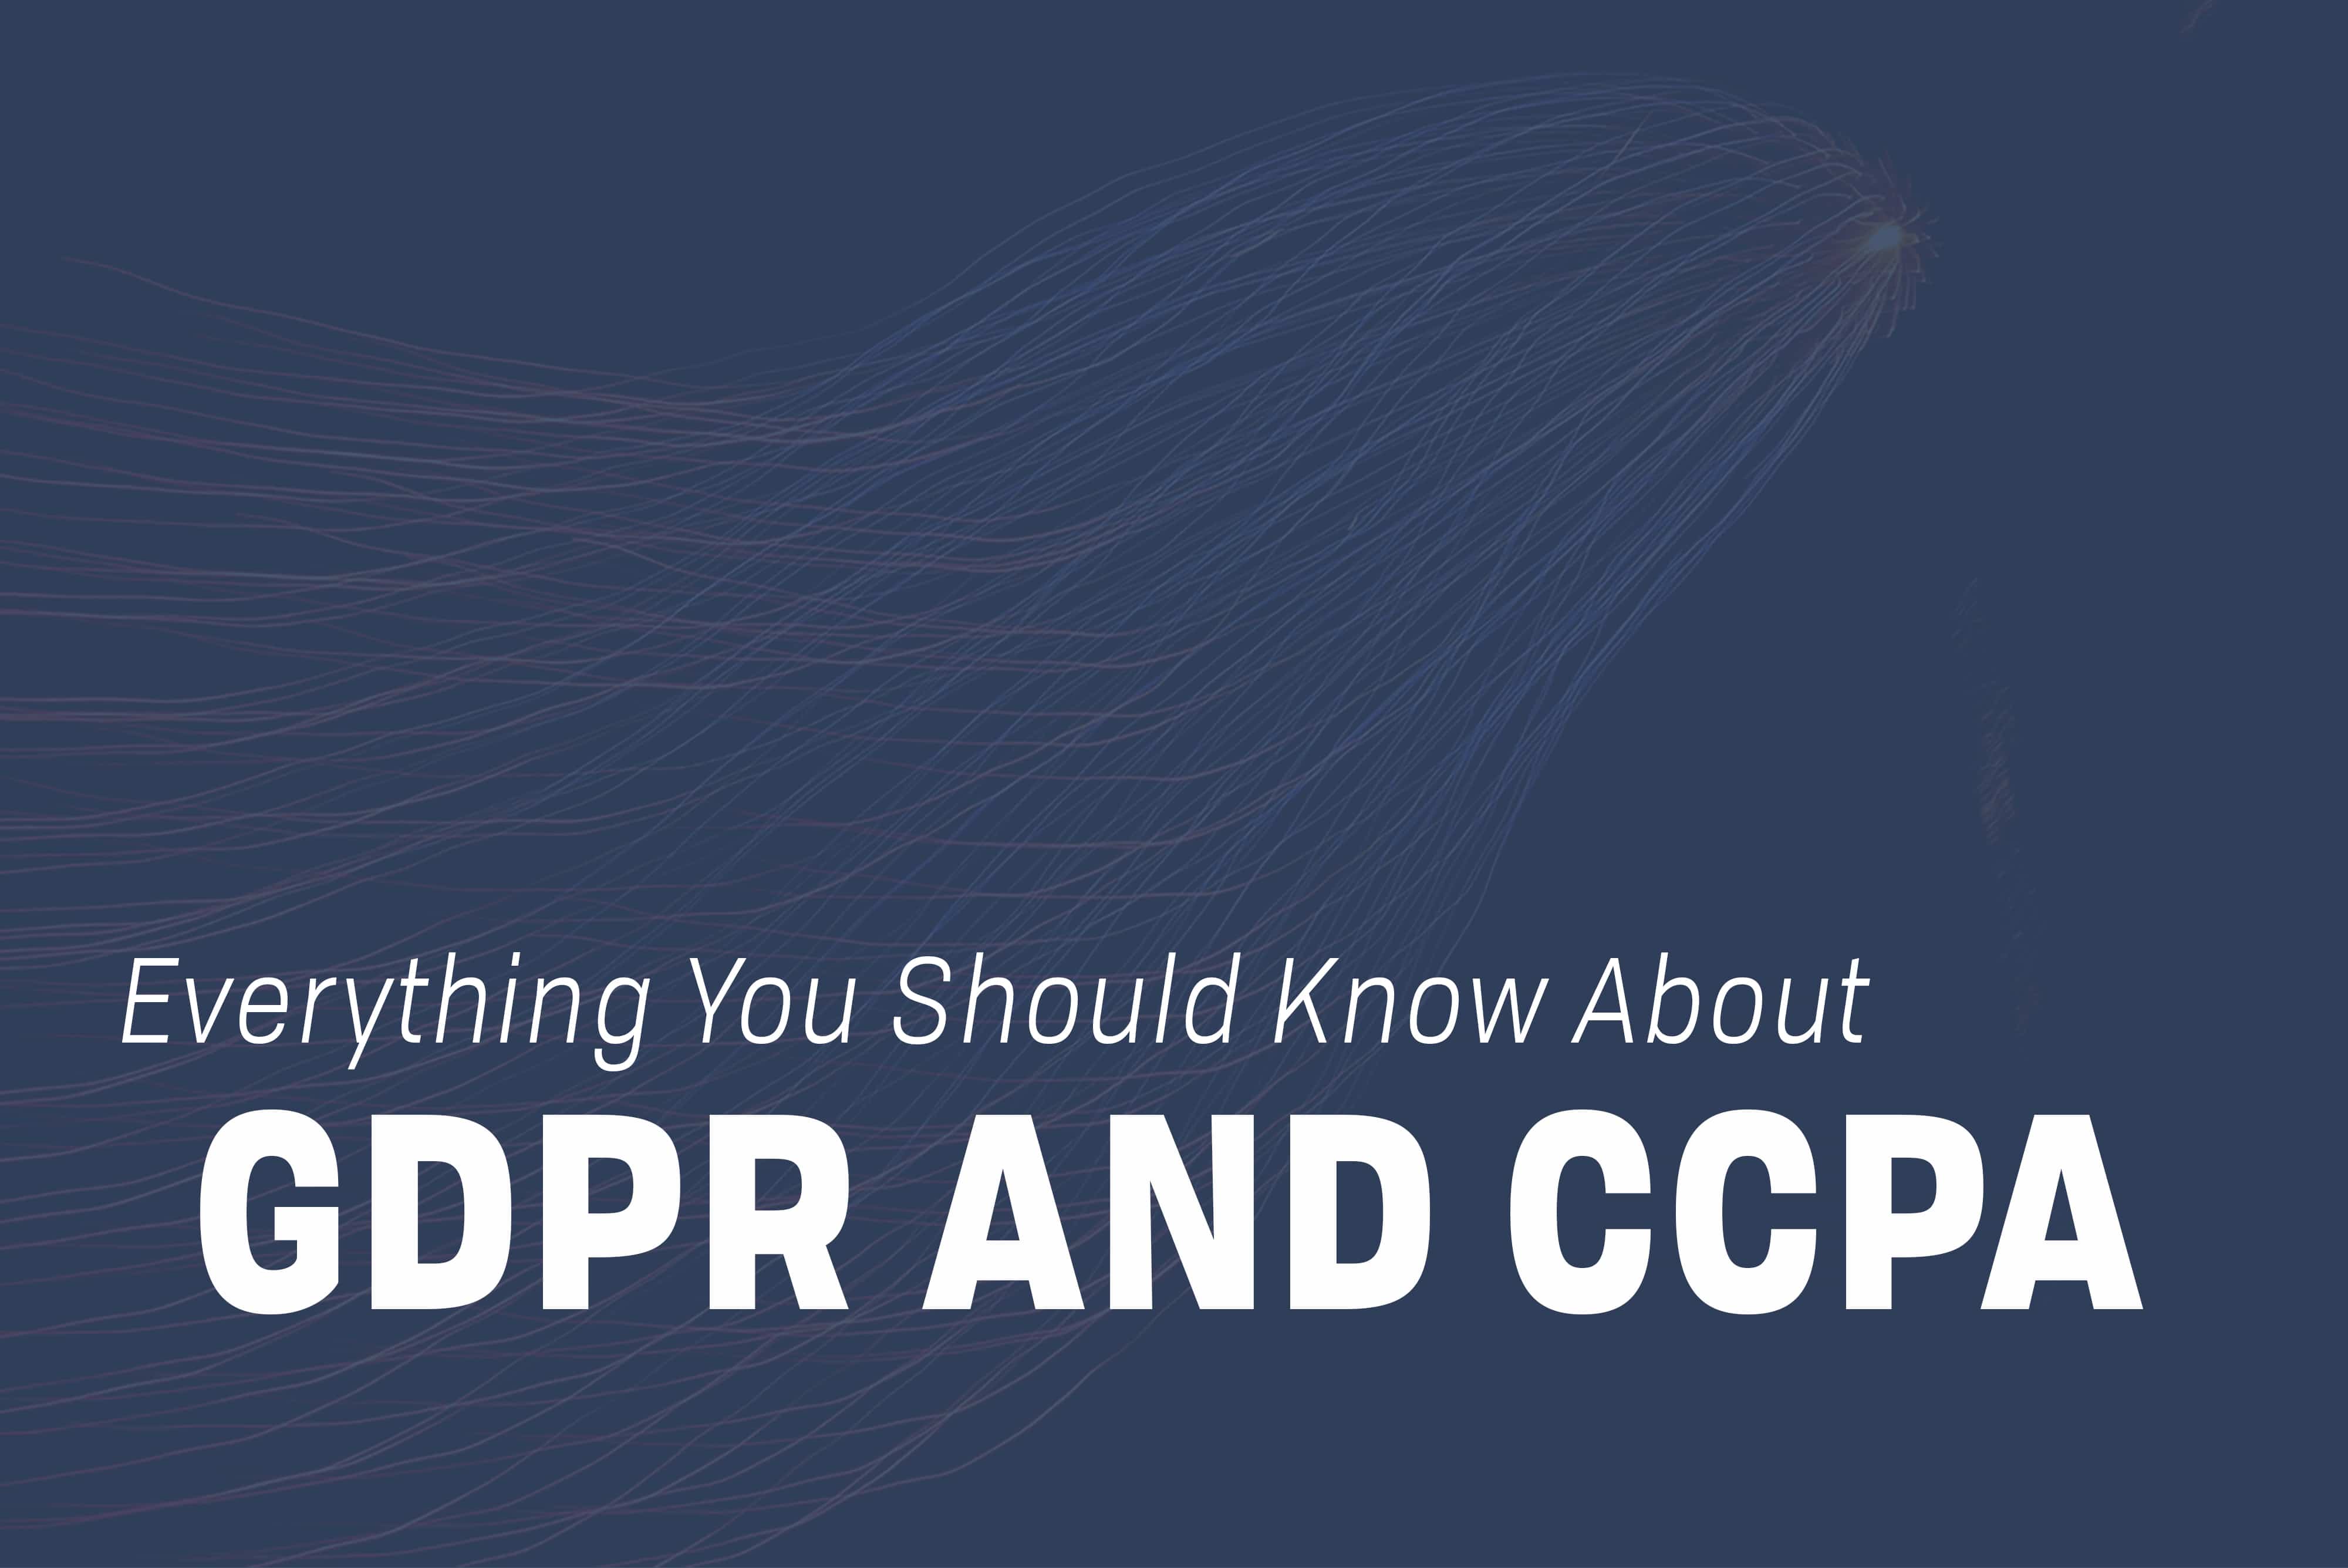 Read more about the article GDPR and CCPA: Everything You Should Know